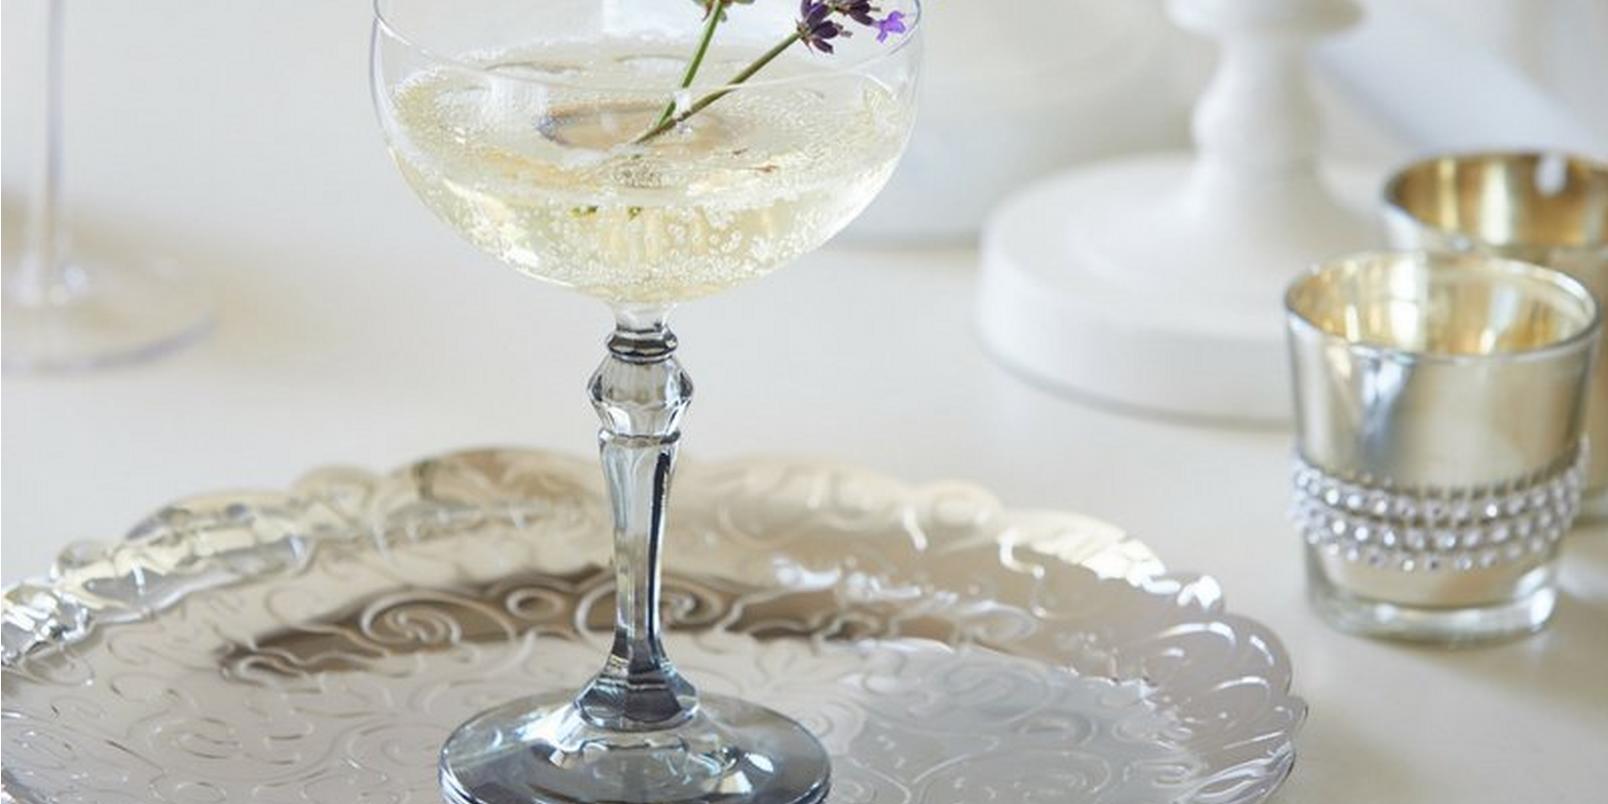 Lavender-rosemary-Floral-Cocktail-closeup